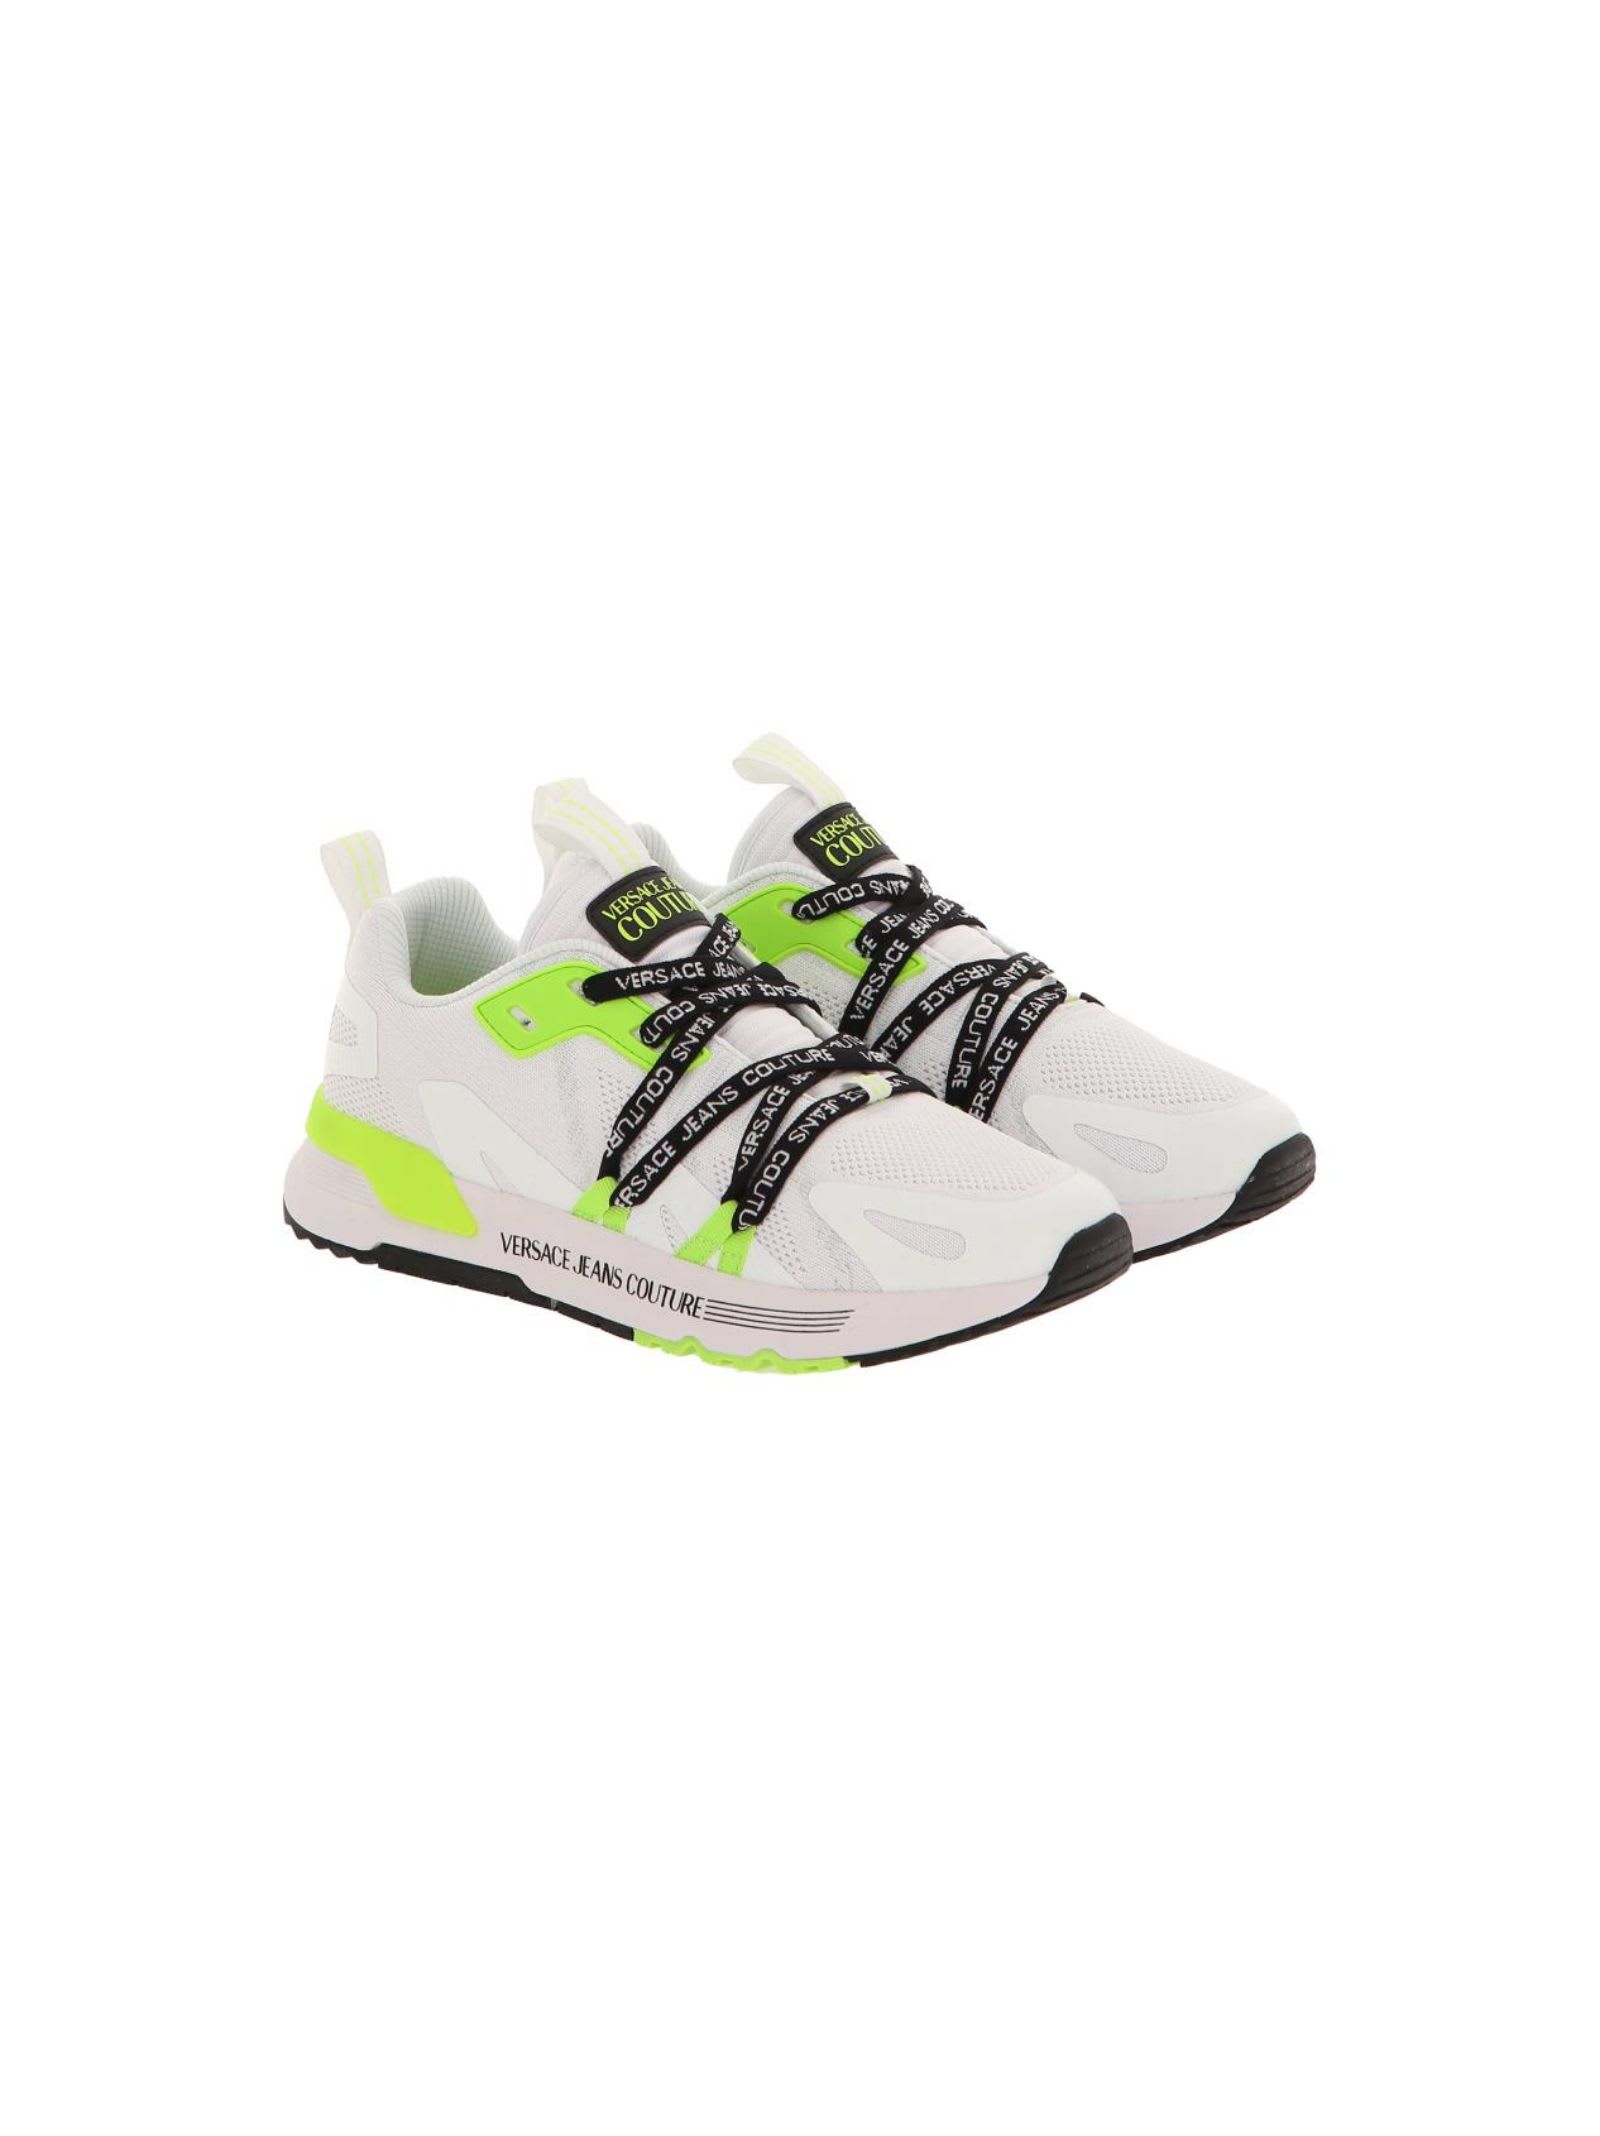 Versace Jeans Couture Sneakers In White/green Fluo